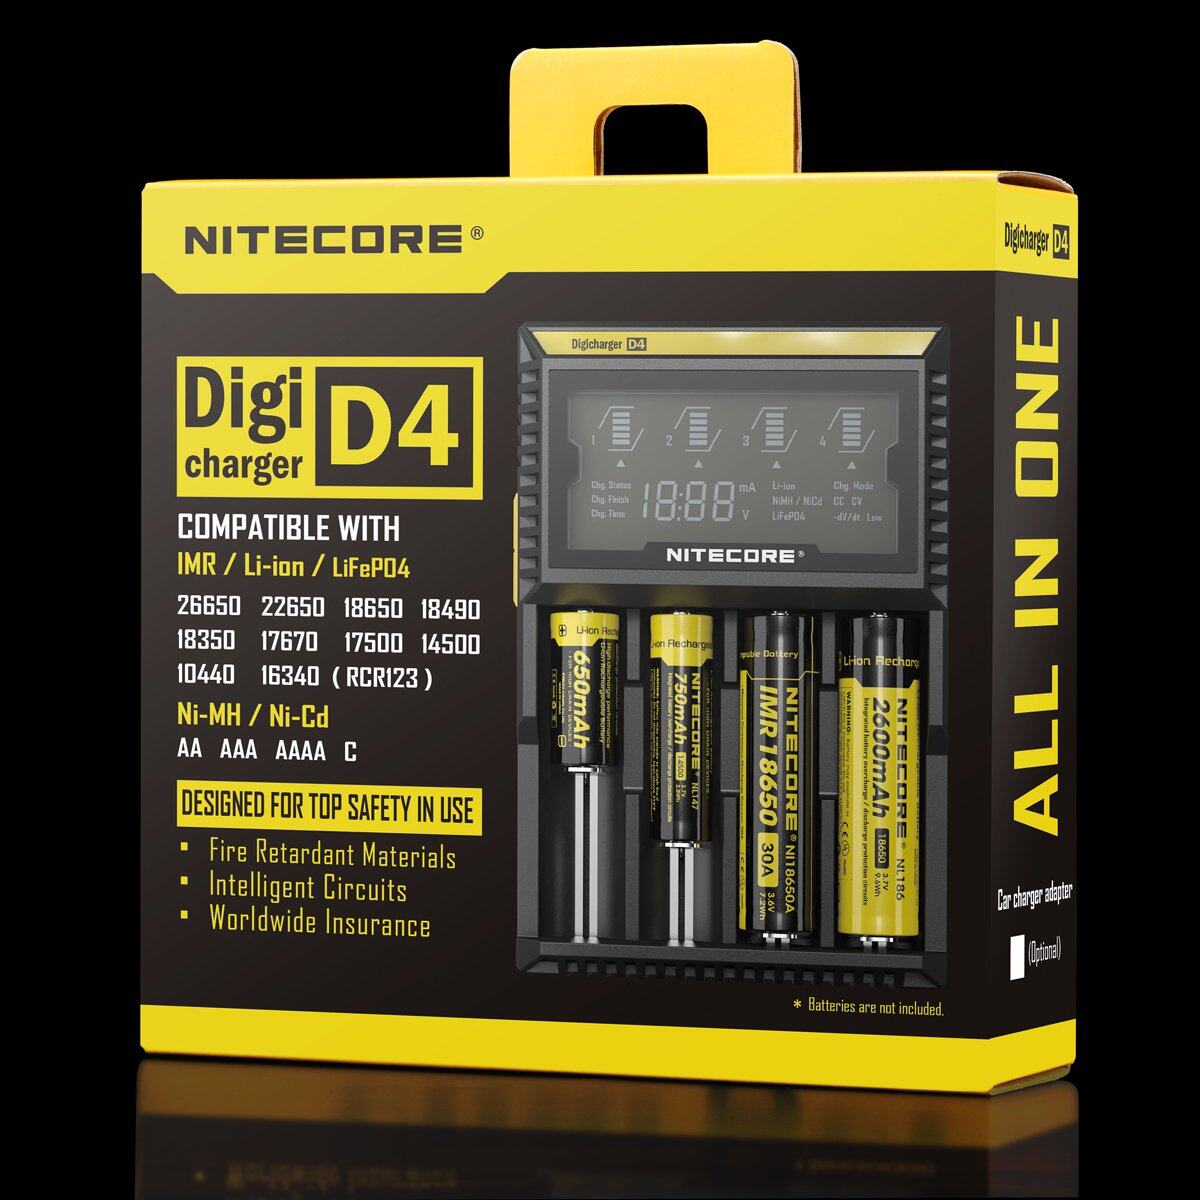 NITECORE D4 LCD Screen Digicharger Charger For AA AAA 18650 14500 Battery เครื่องชาร์จ (Black)